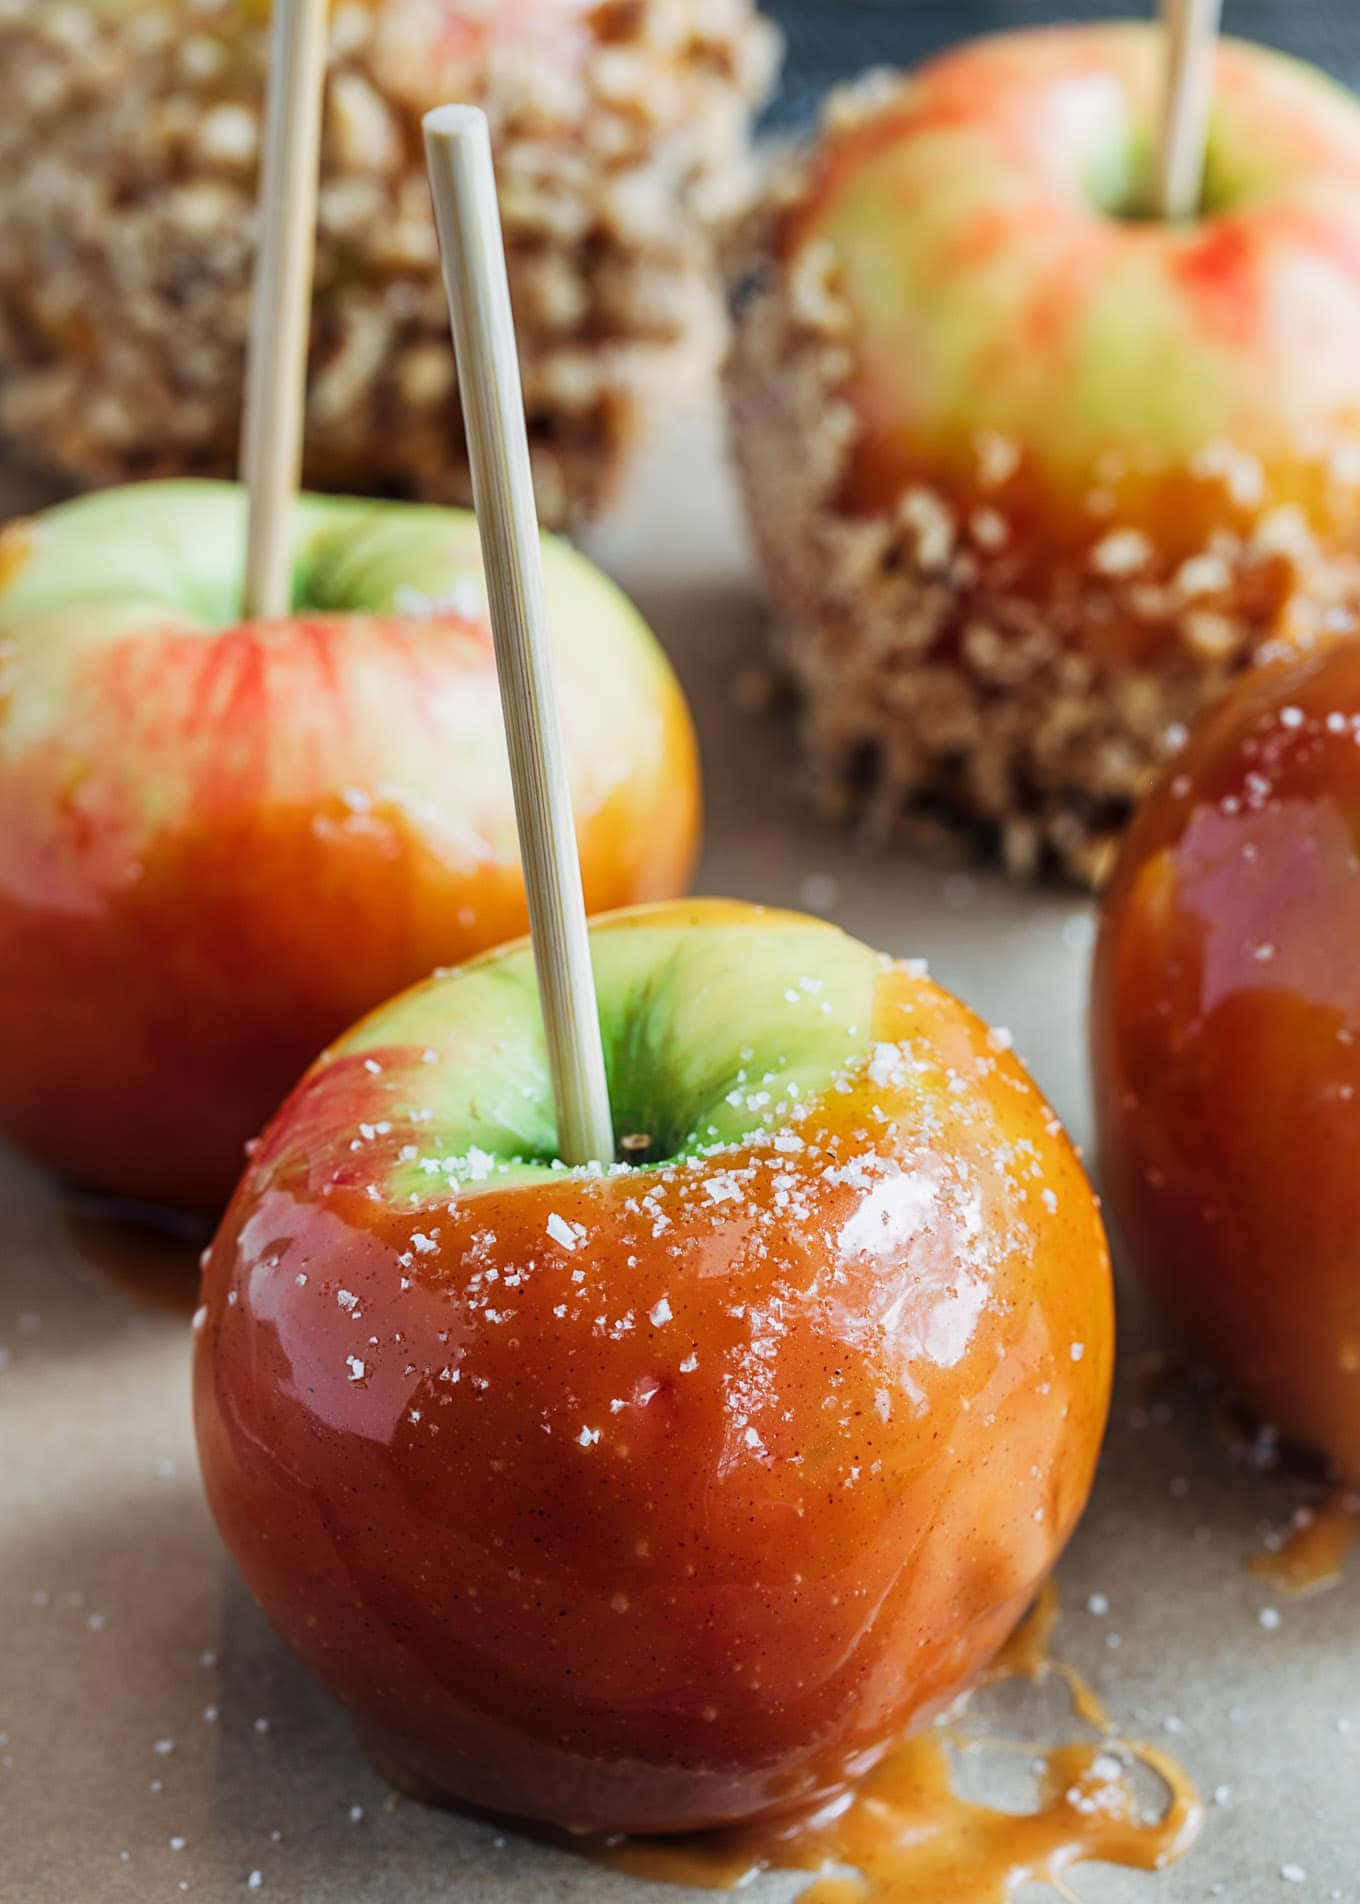 Tempting Caramel Apples with a Variety of Toppings Wallpaper